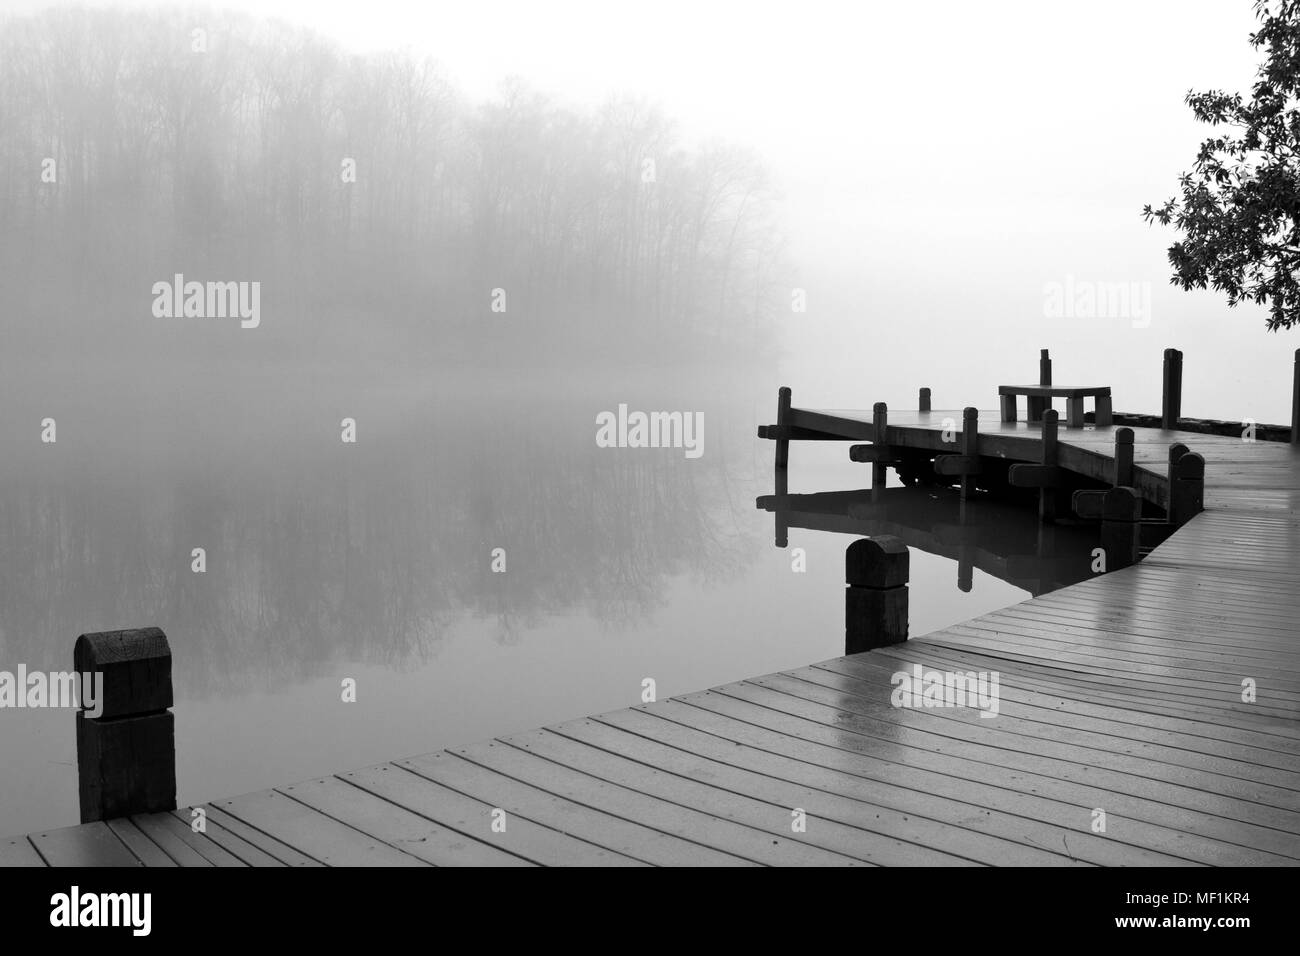 Fog covers a lake and wooden deck on a dreary winter day. Stock Photo